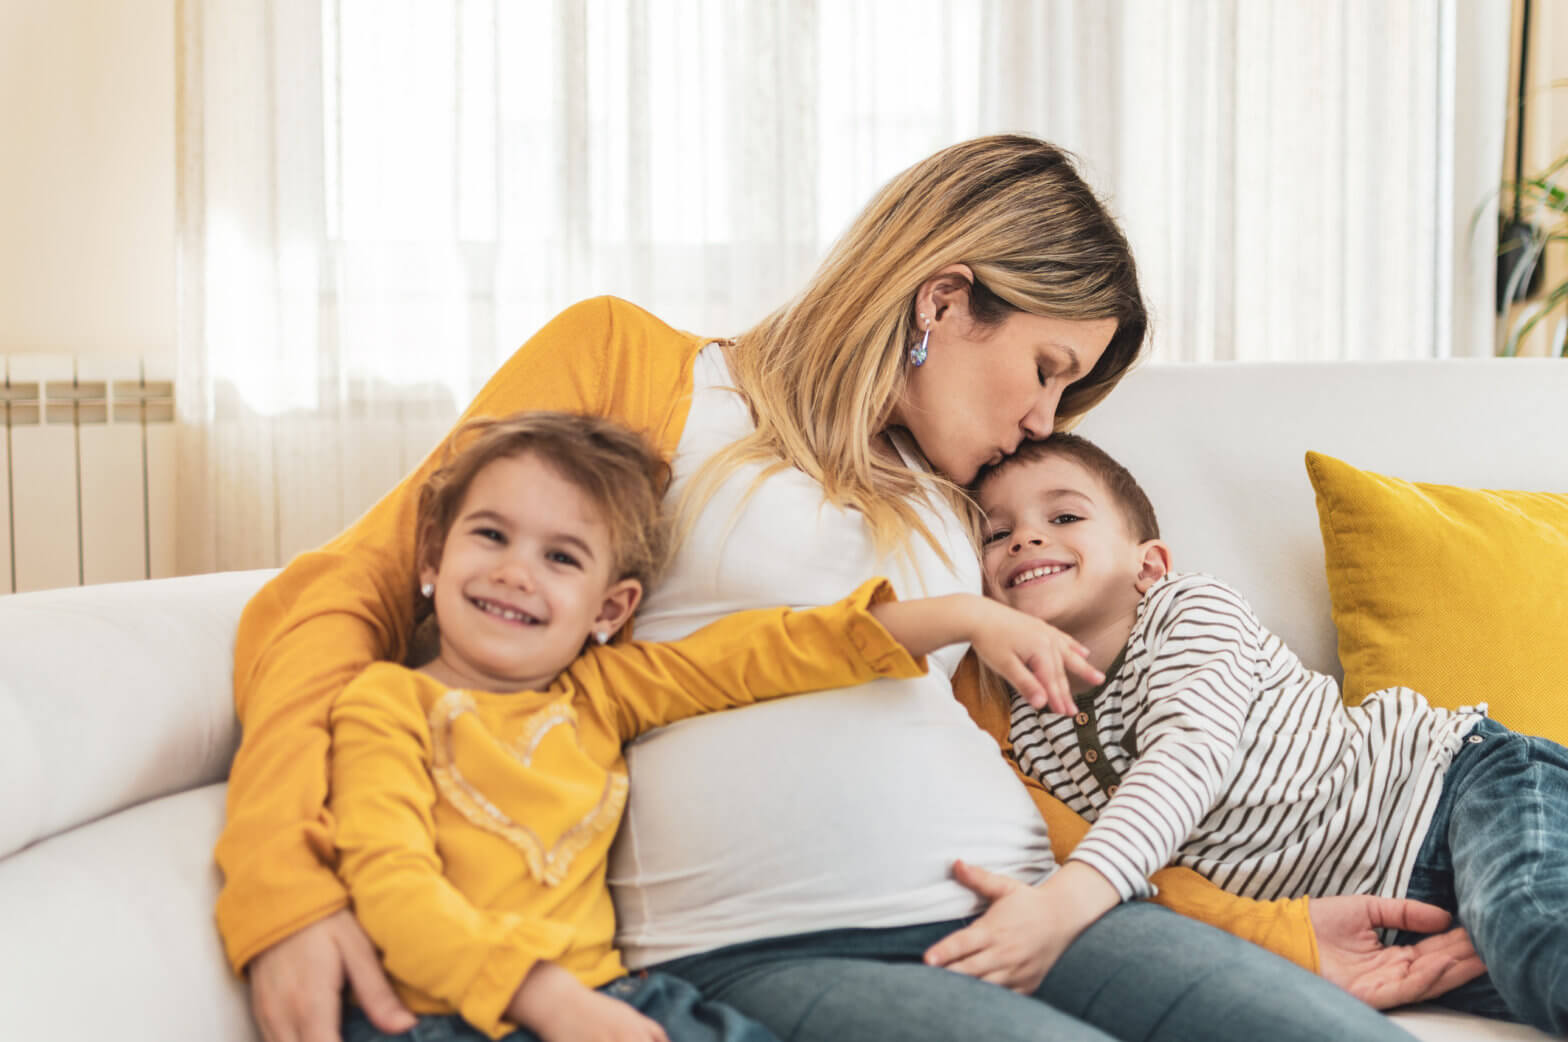 Happy mother and children,a boy and a girl are embracing pregnant belly with excitement on their faces.